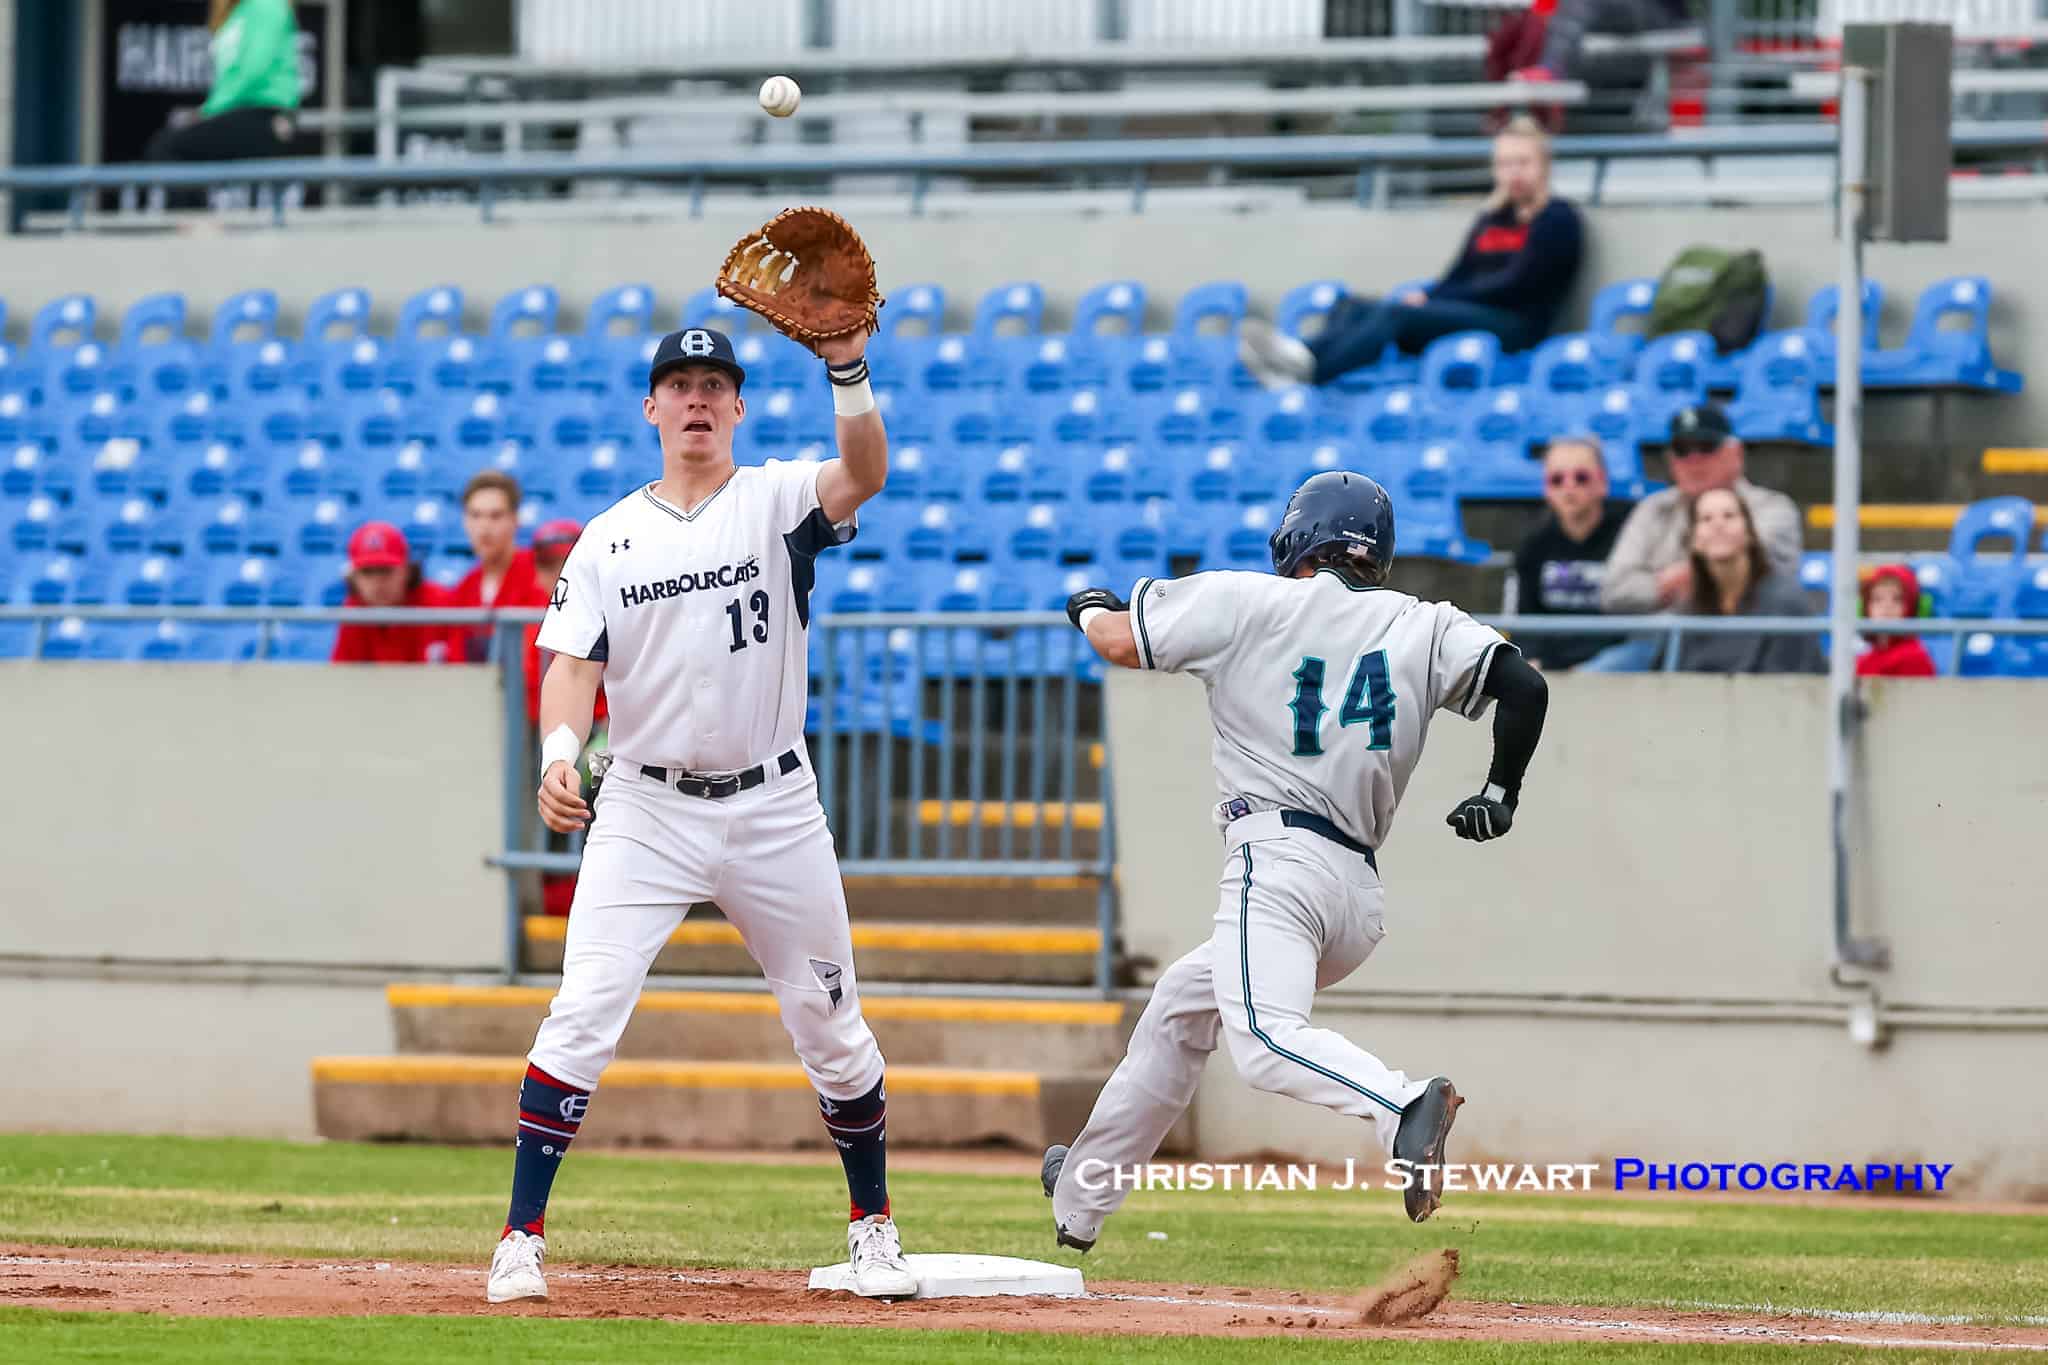 HarbourCats Use Long Ball to End Bells Streak